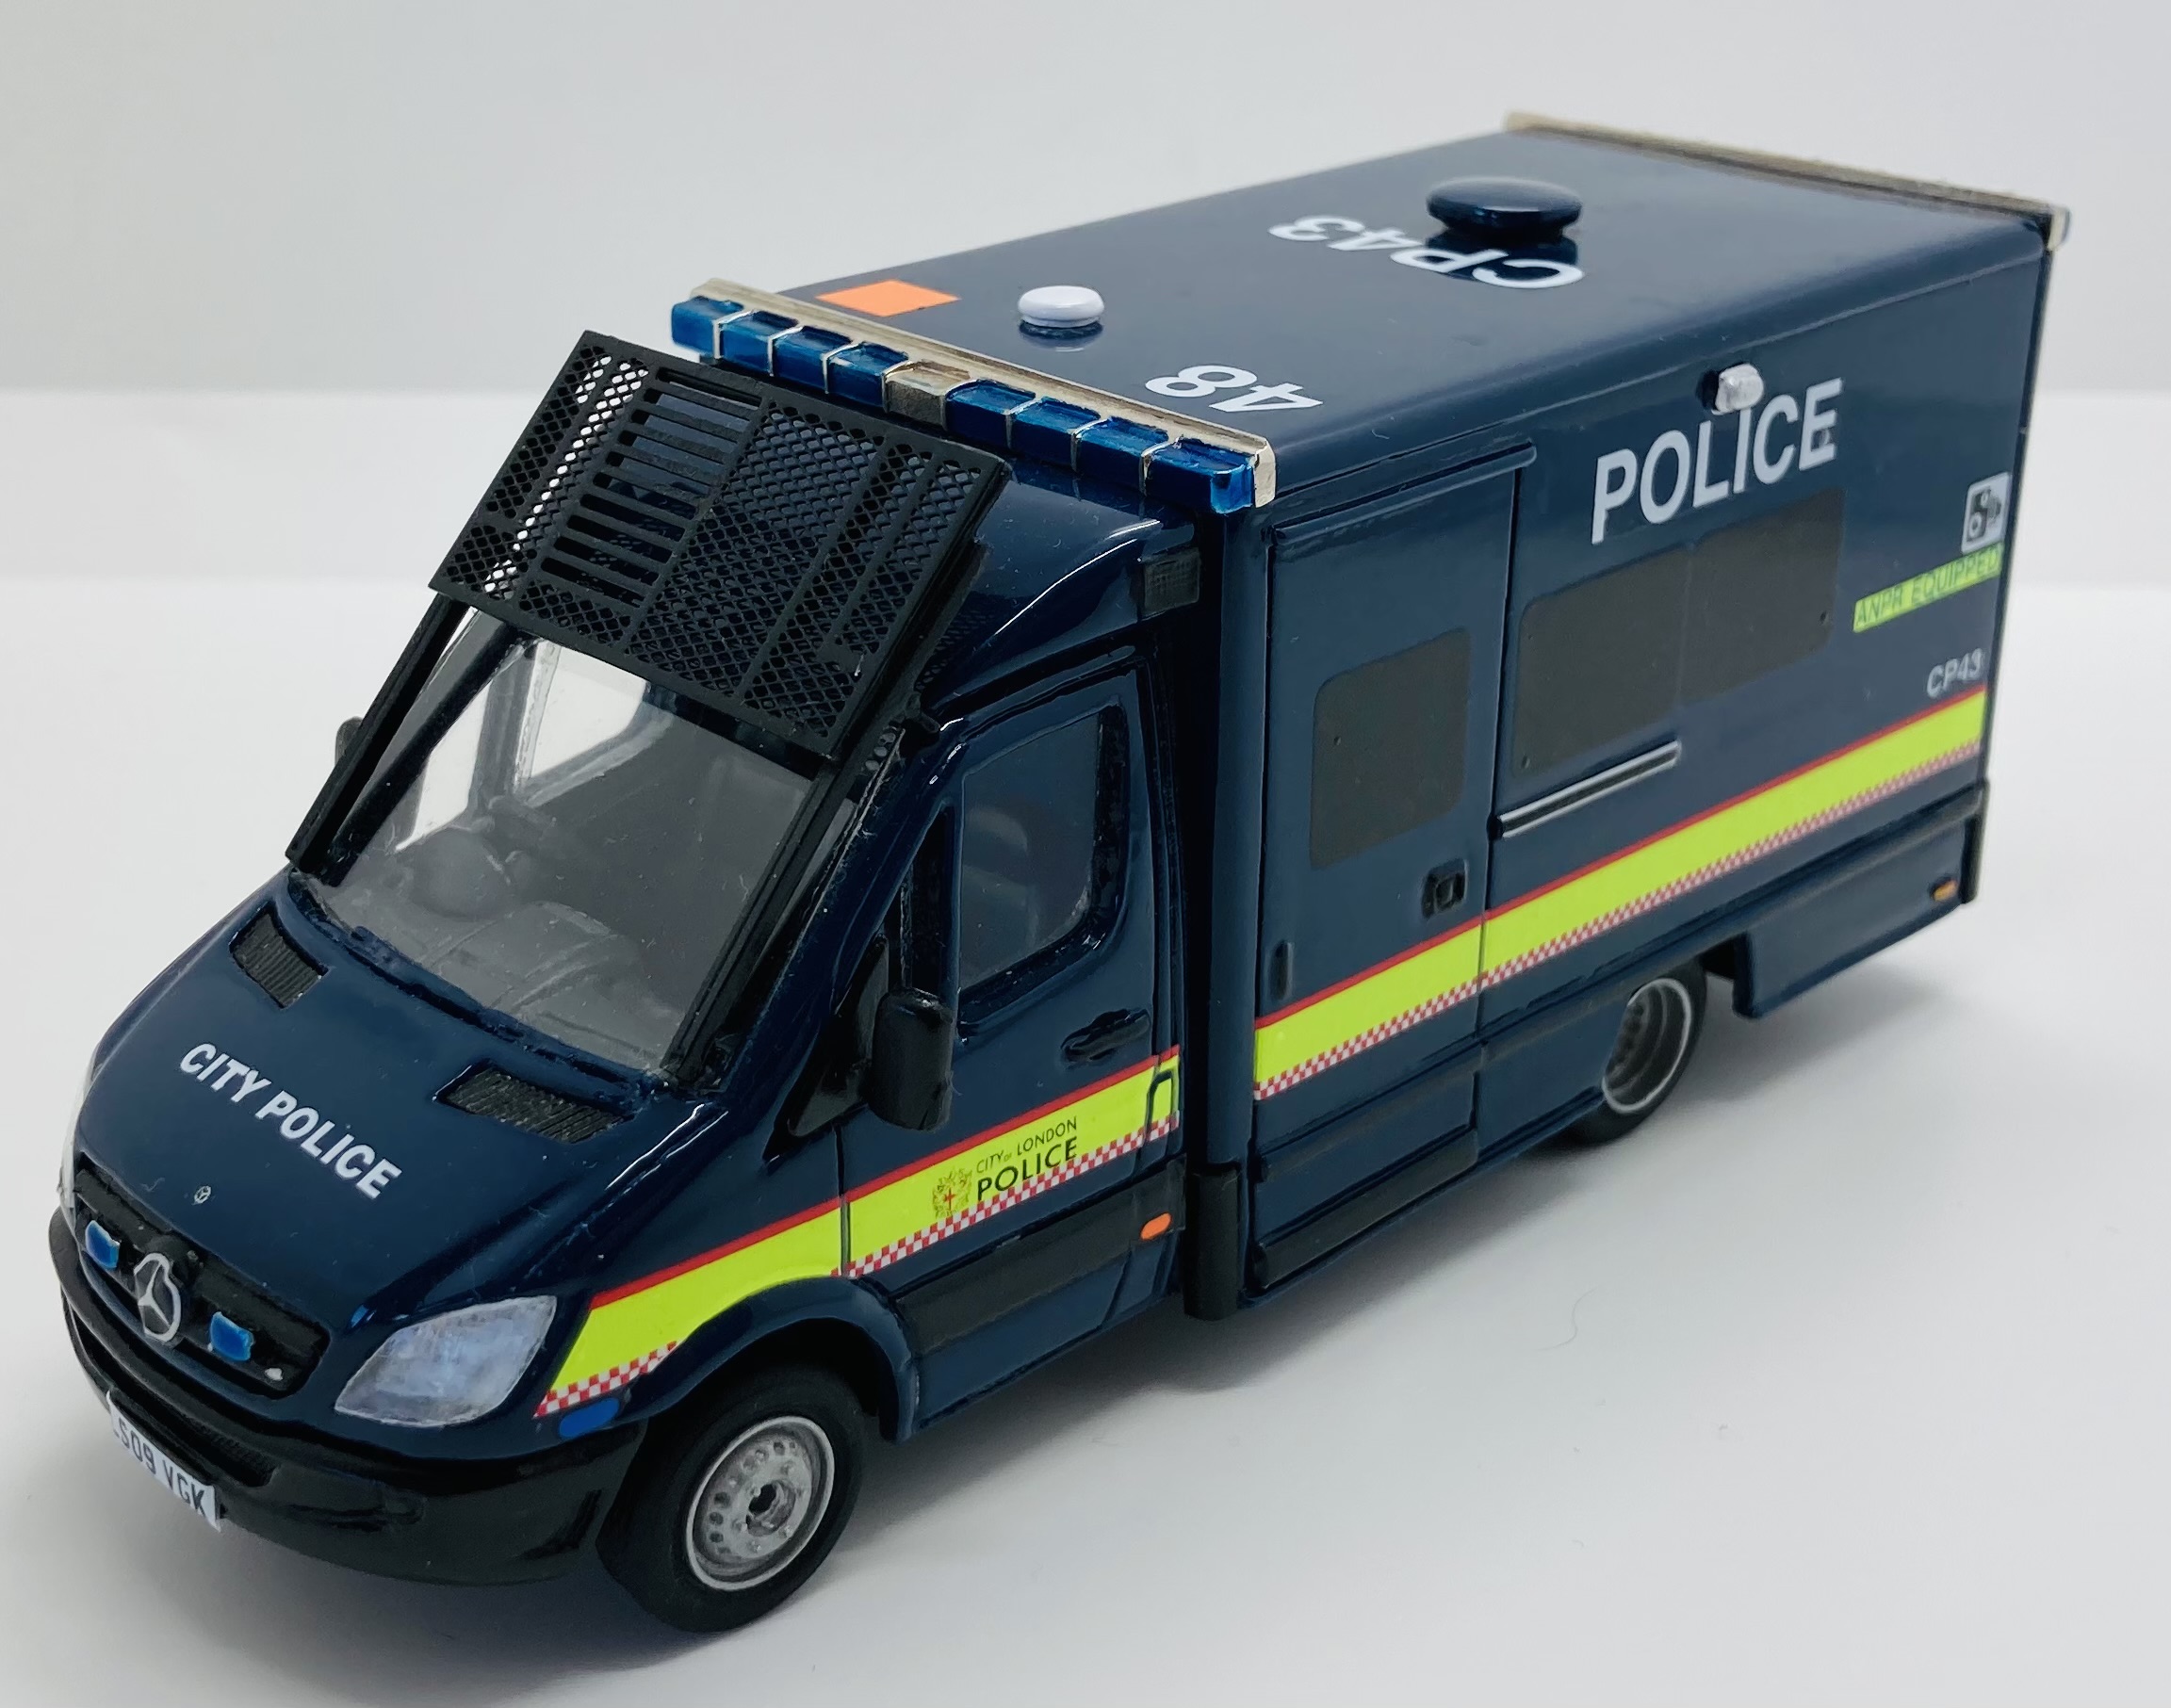 Police Public Order Box Carrier